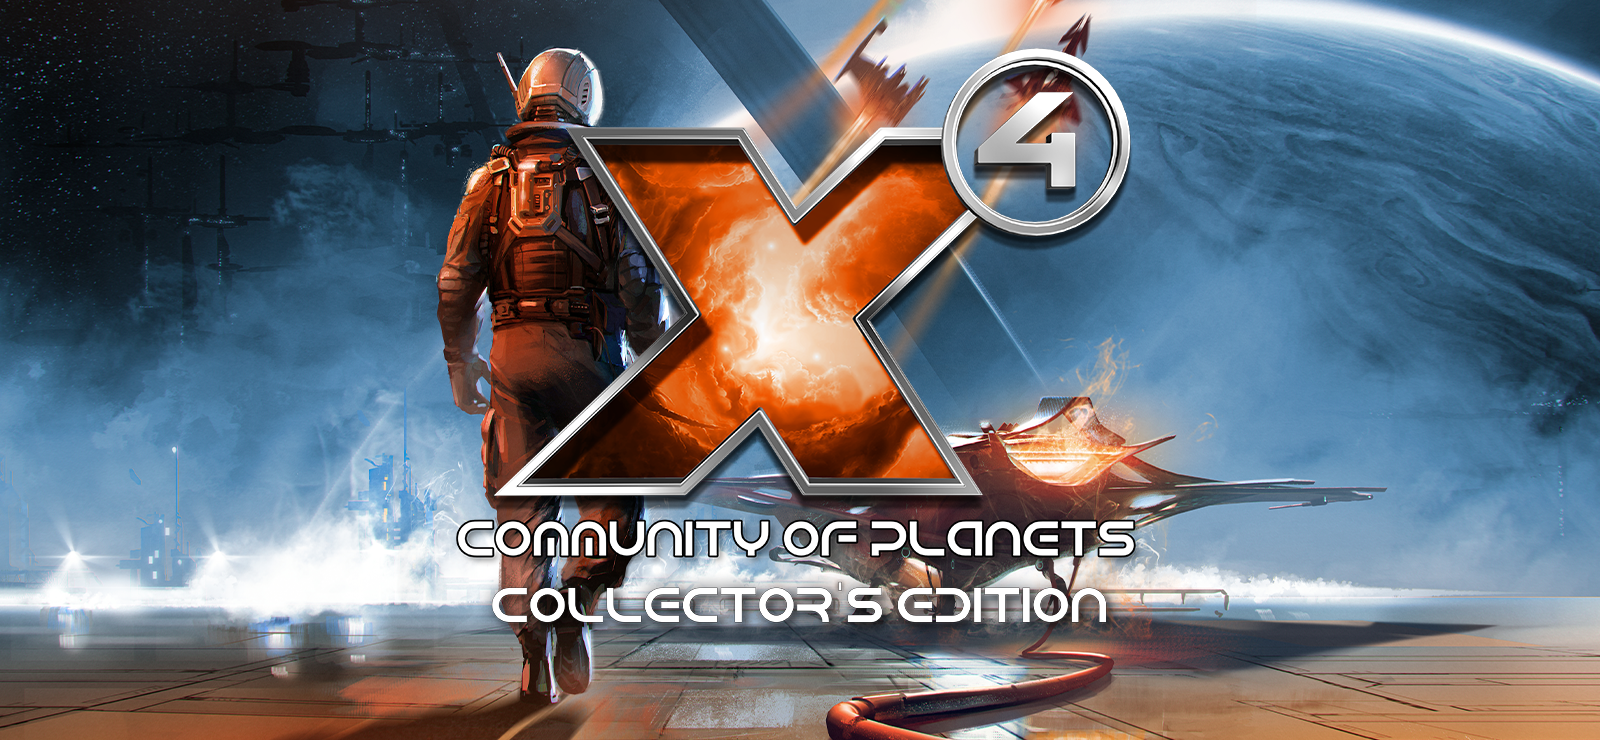 X4: Community Of Planets Collector's Edition